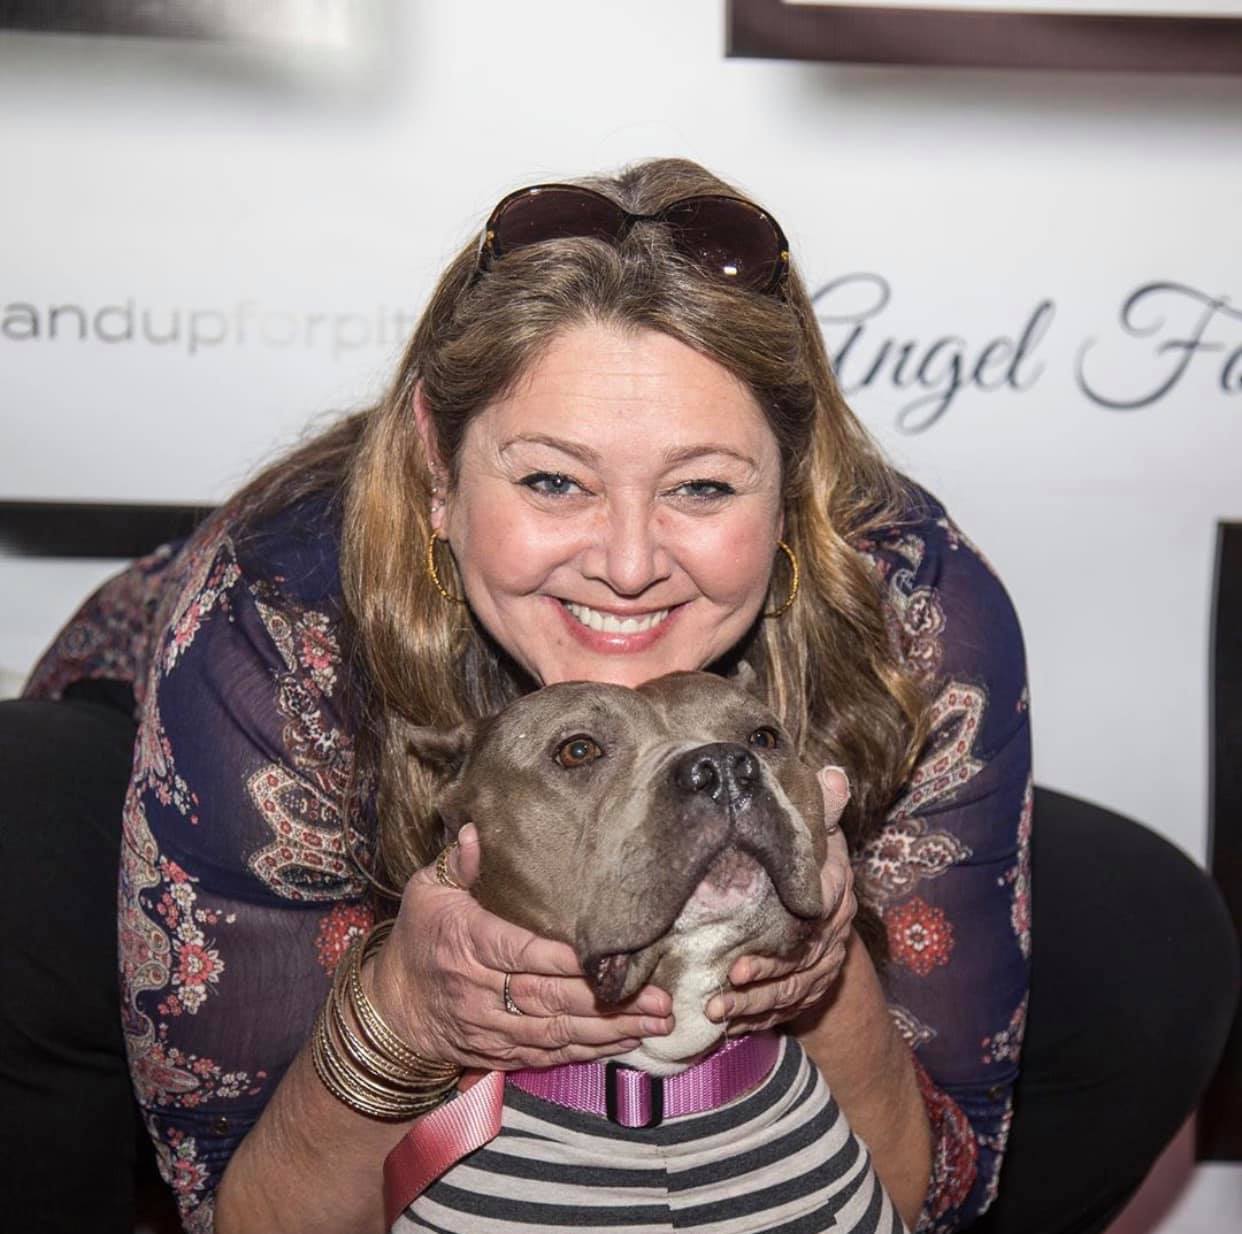 CAMRYN MANHEIM TO PRESENT AT STAND UP FOR PITS HOLLYWOOD!!